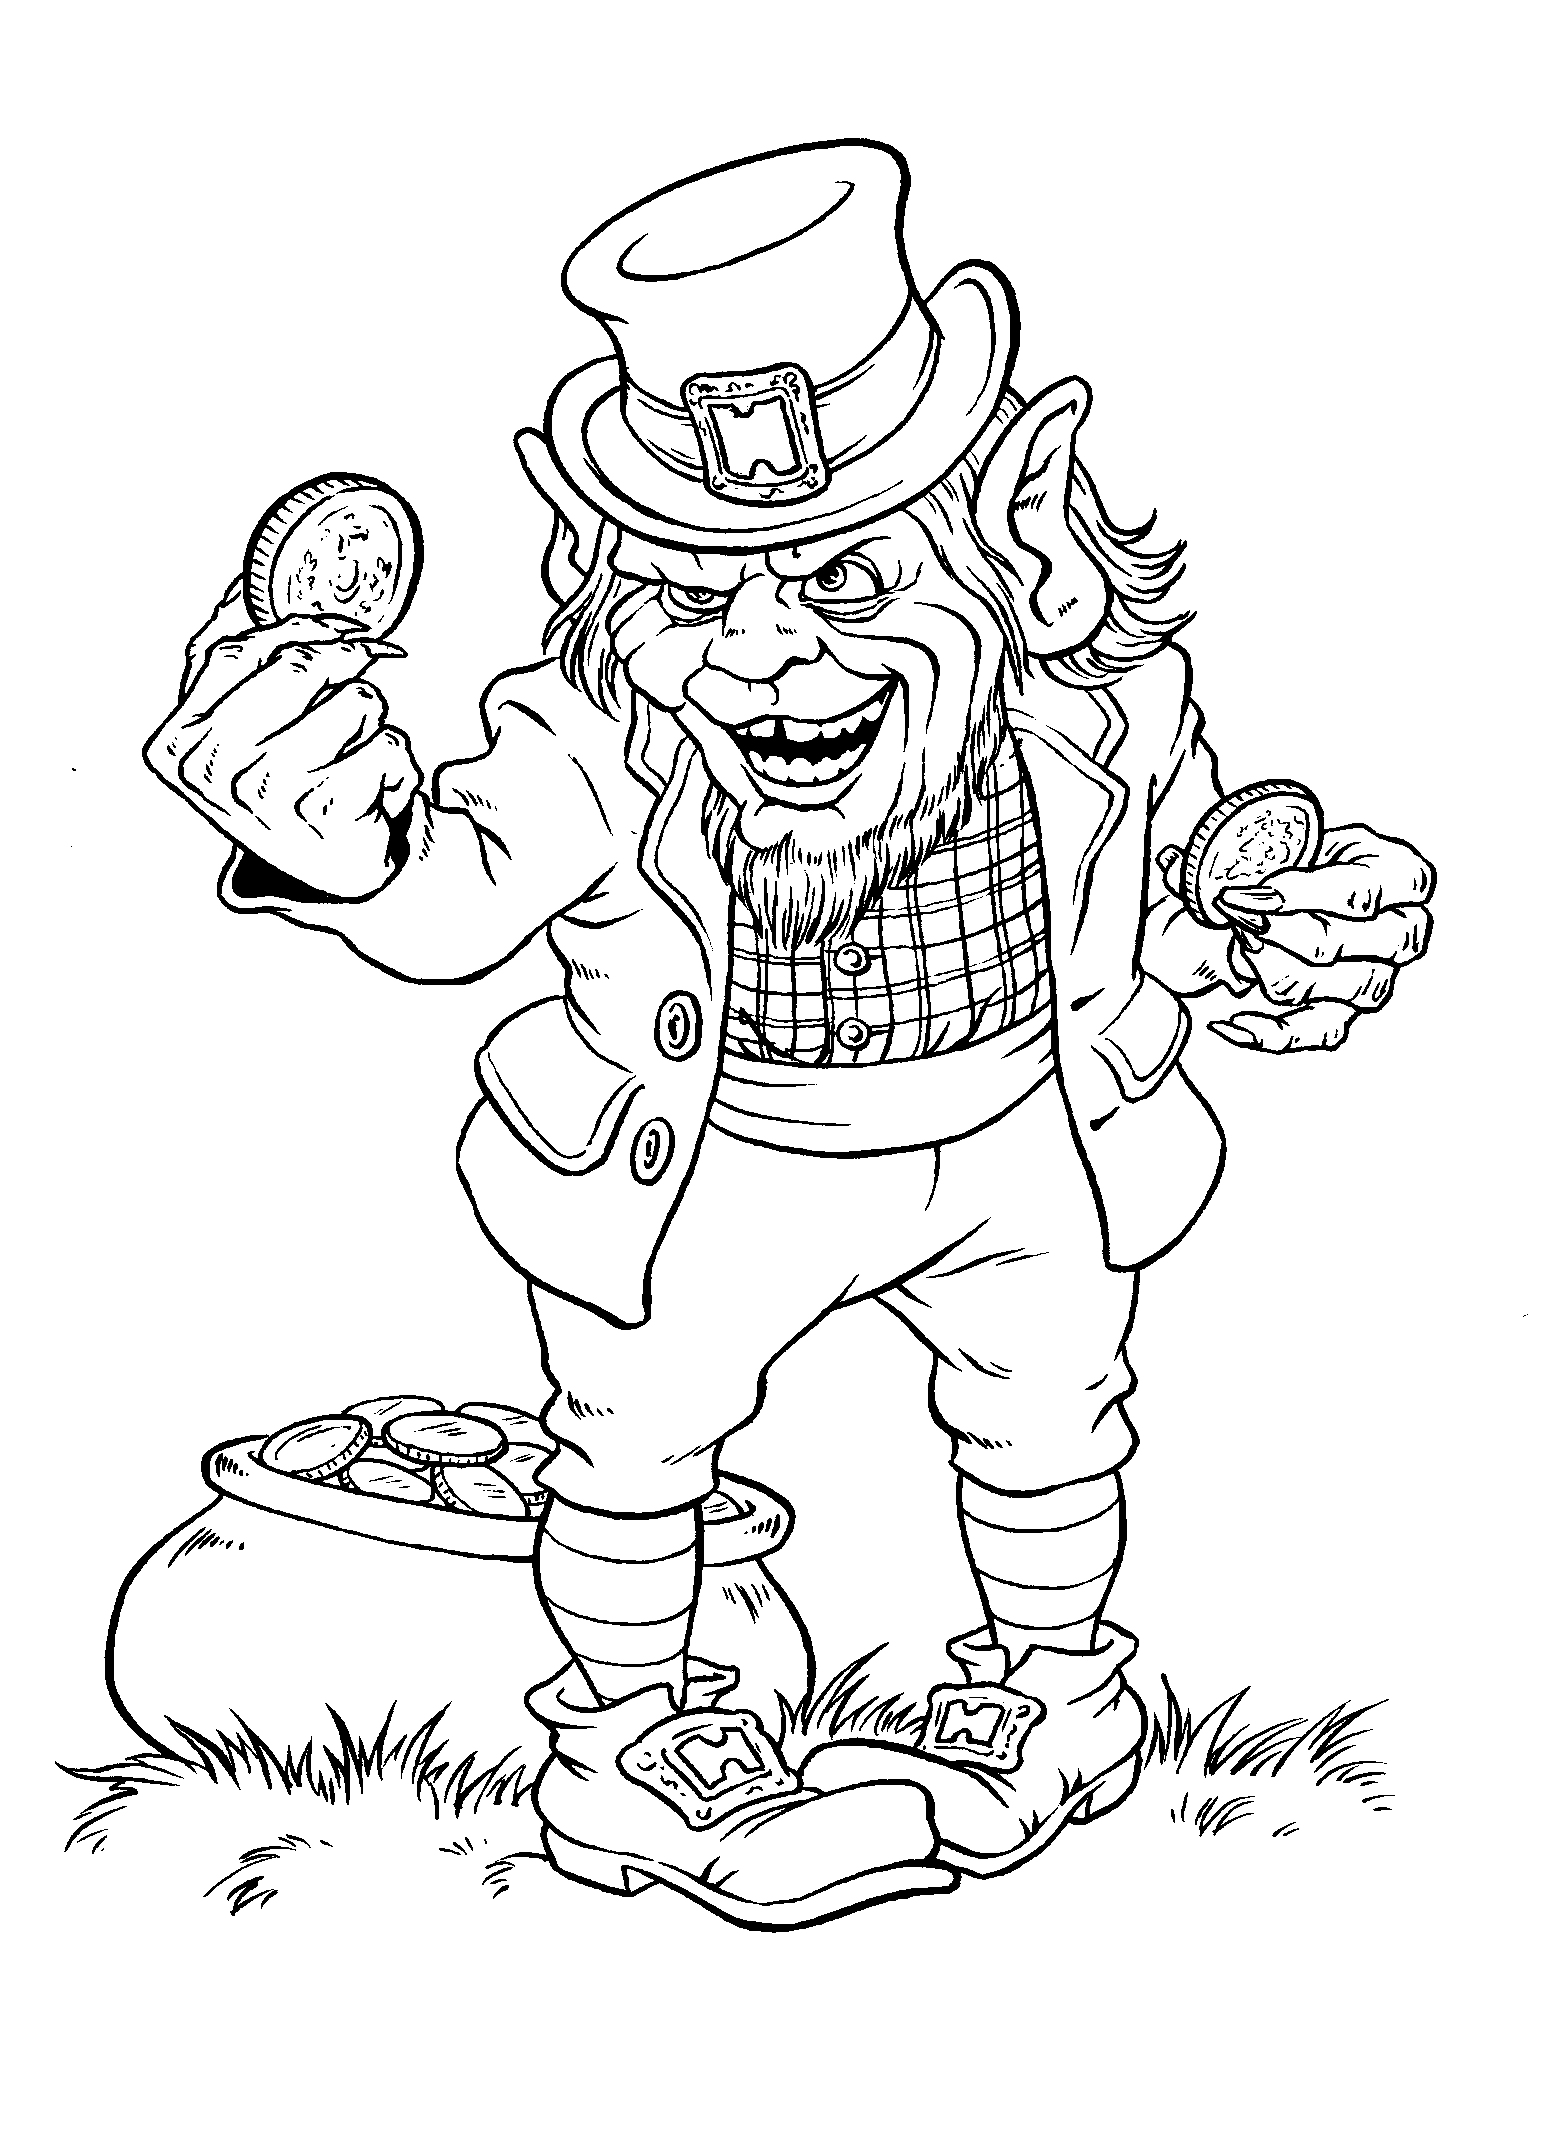 Coloring page - Angry Troll